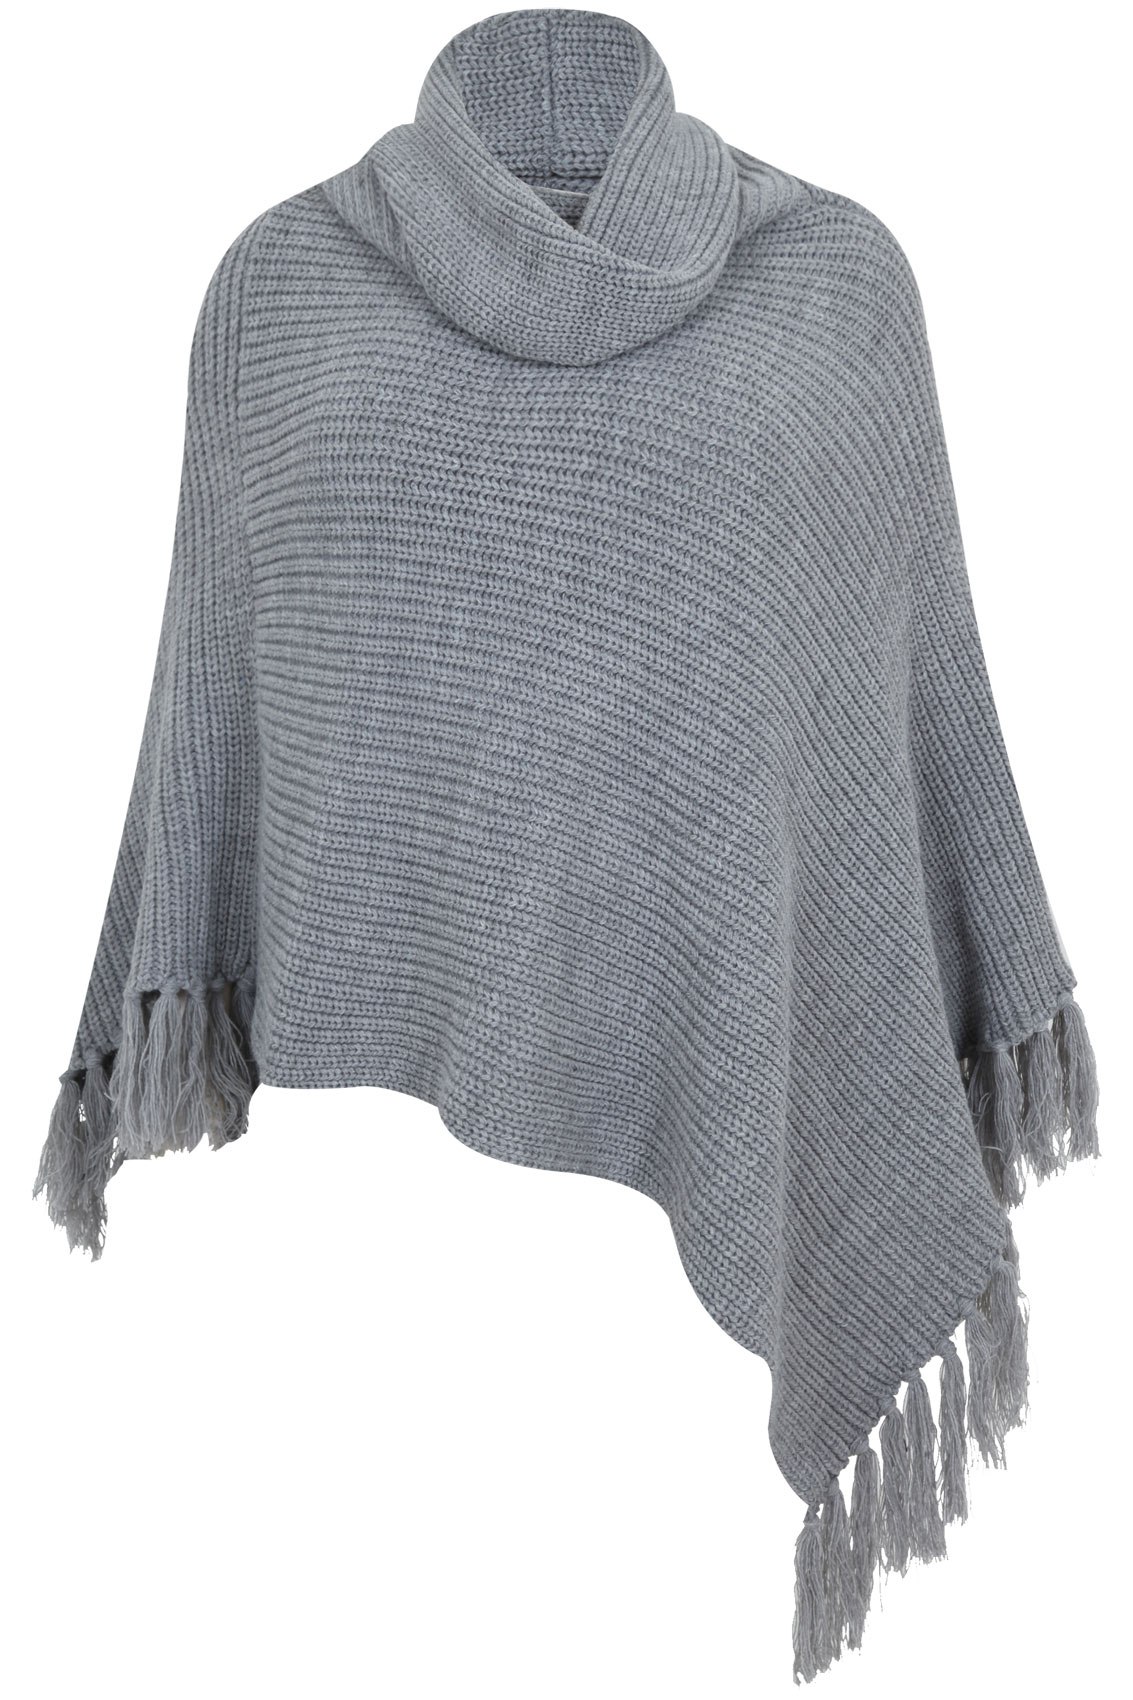 Grey Chunky Knit Cowl Neck Poncho With Tassels